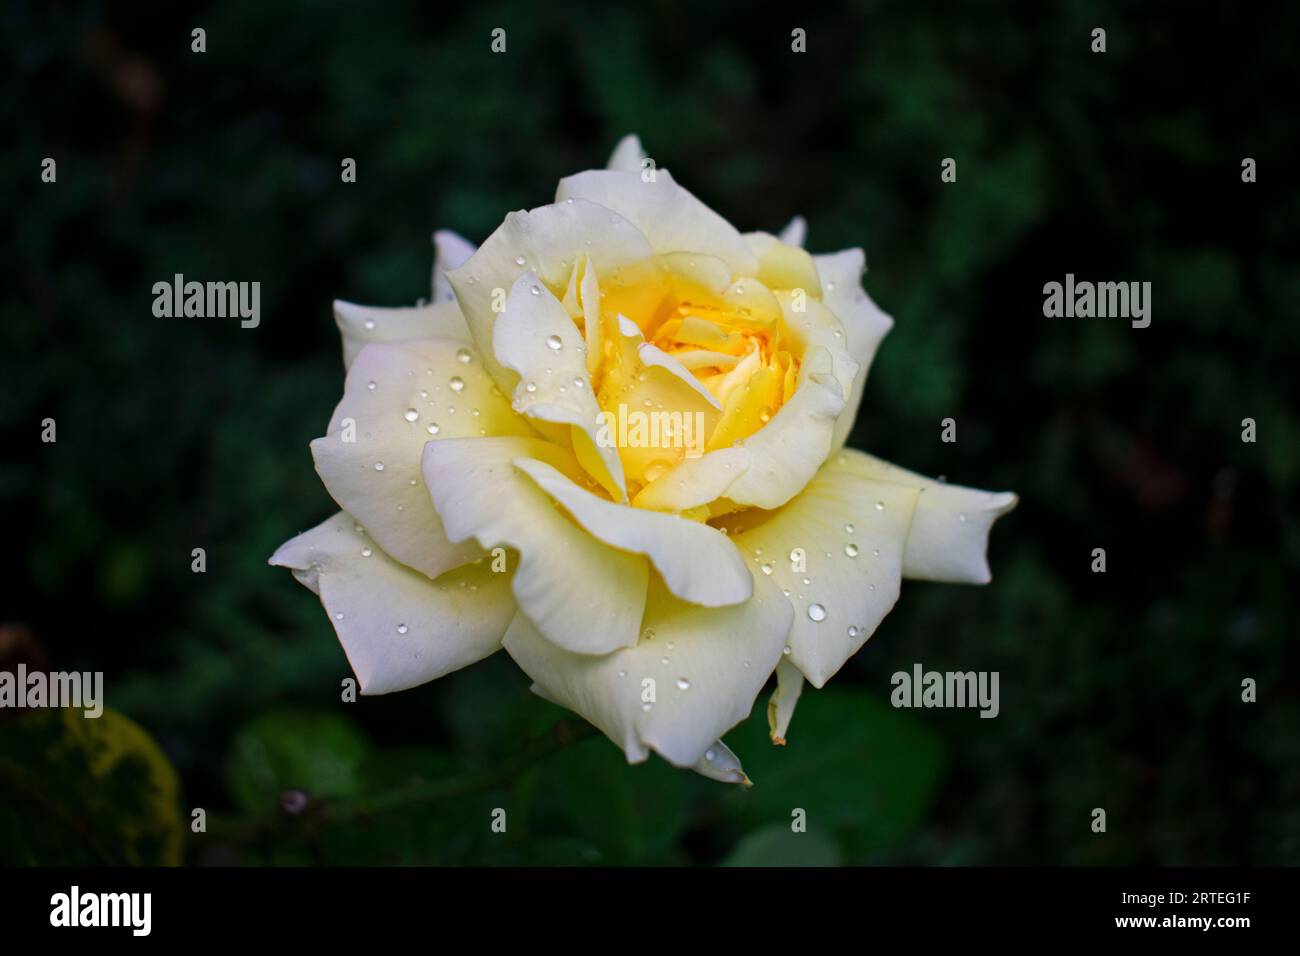 Single large yellow rose, with hints of pink on the outside petals, on a blurred green background -27 Stock Photo